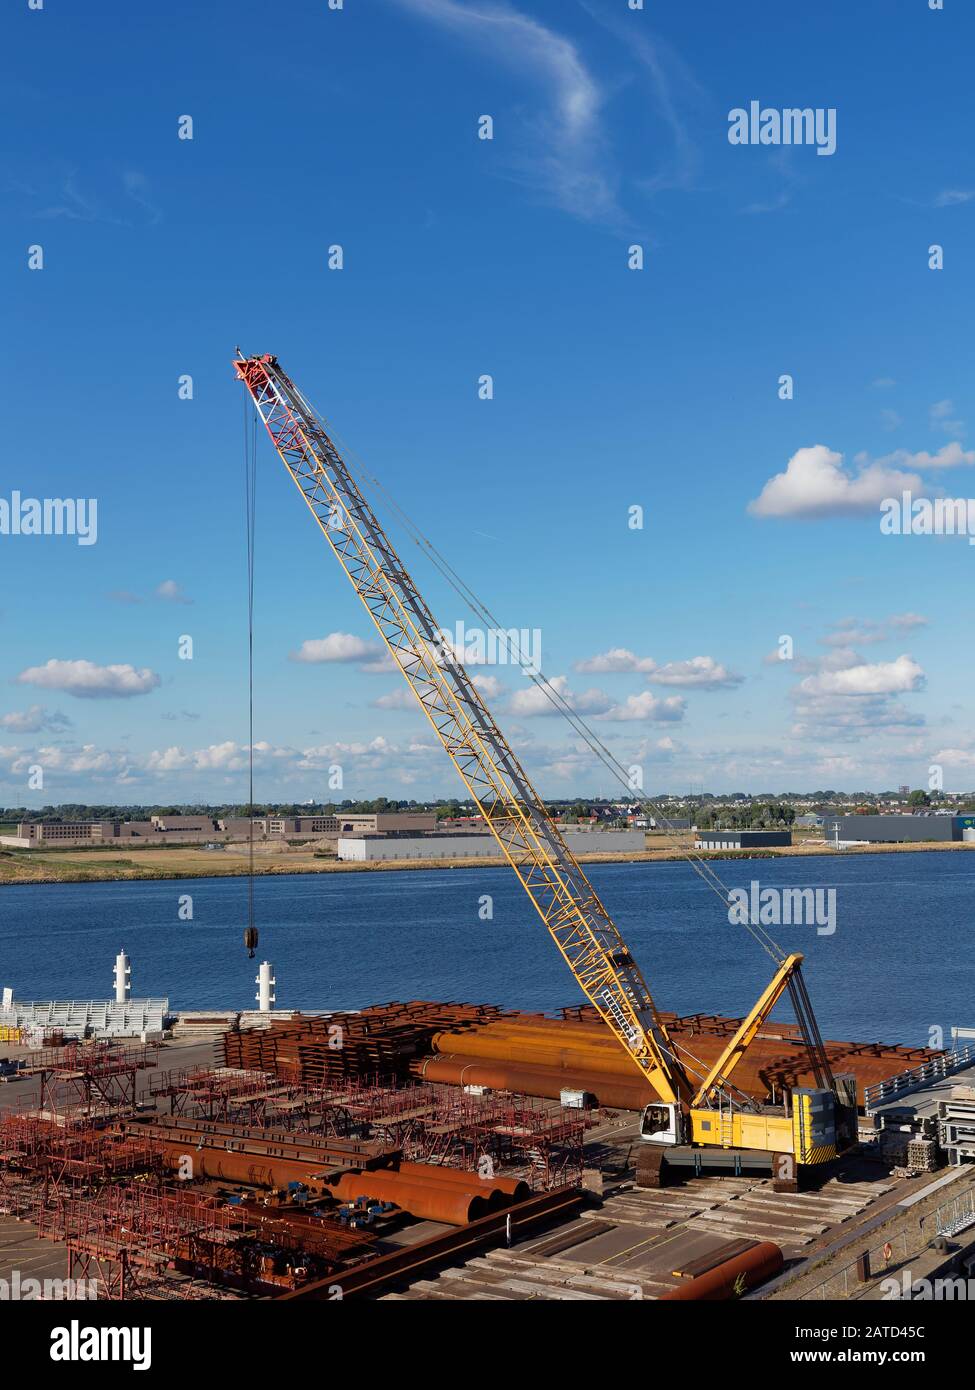 A Mobile Yellow Crane on the quayside of Alaskahaven, full of Piping, Concrete Ballast and Construction Materials. Stock Photo